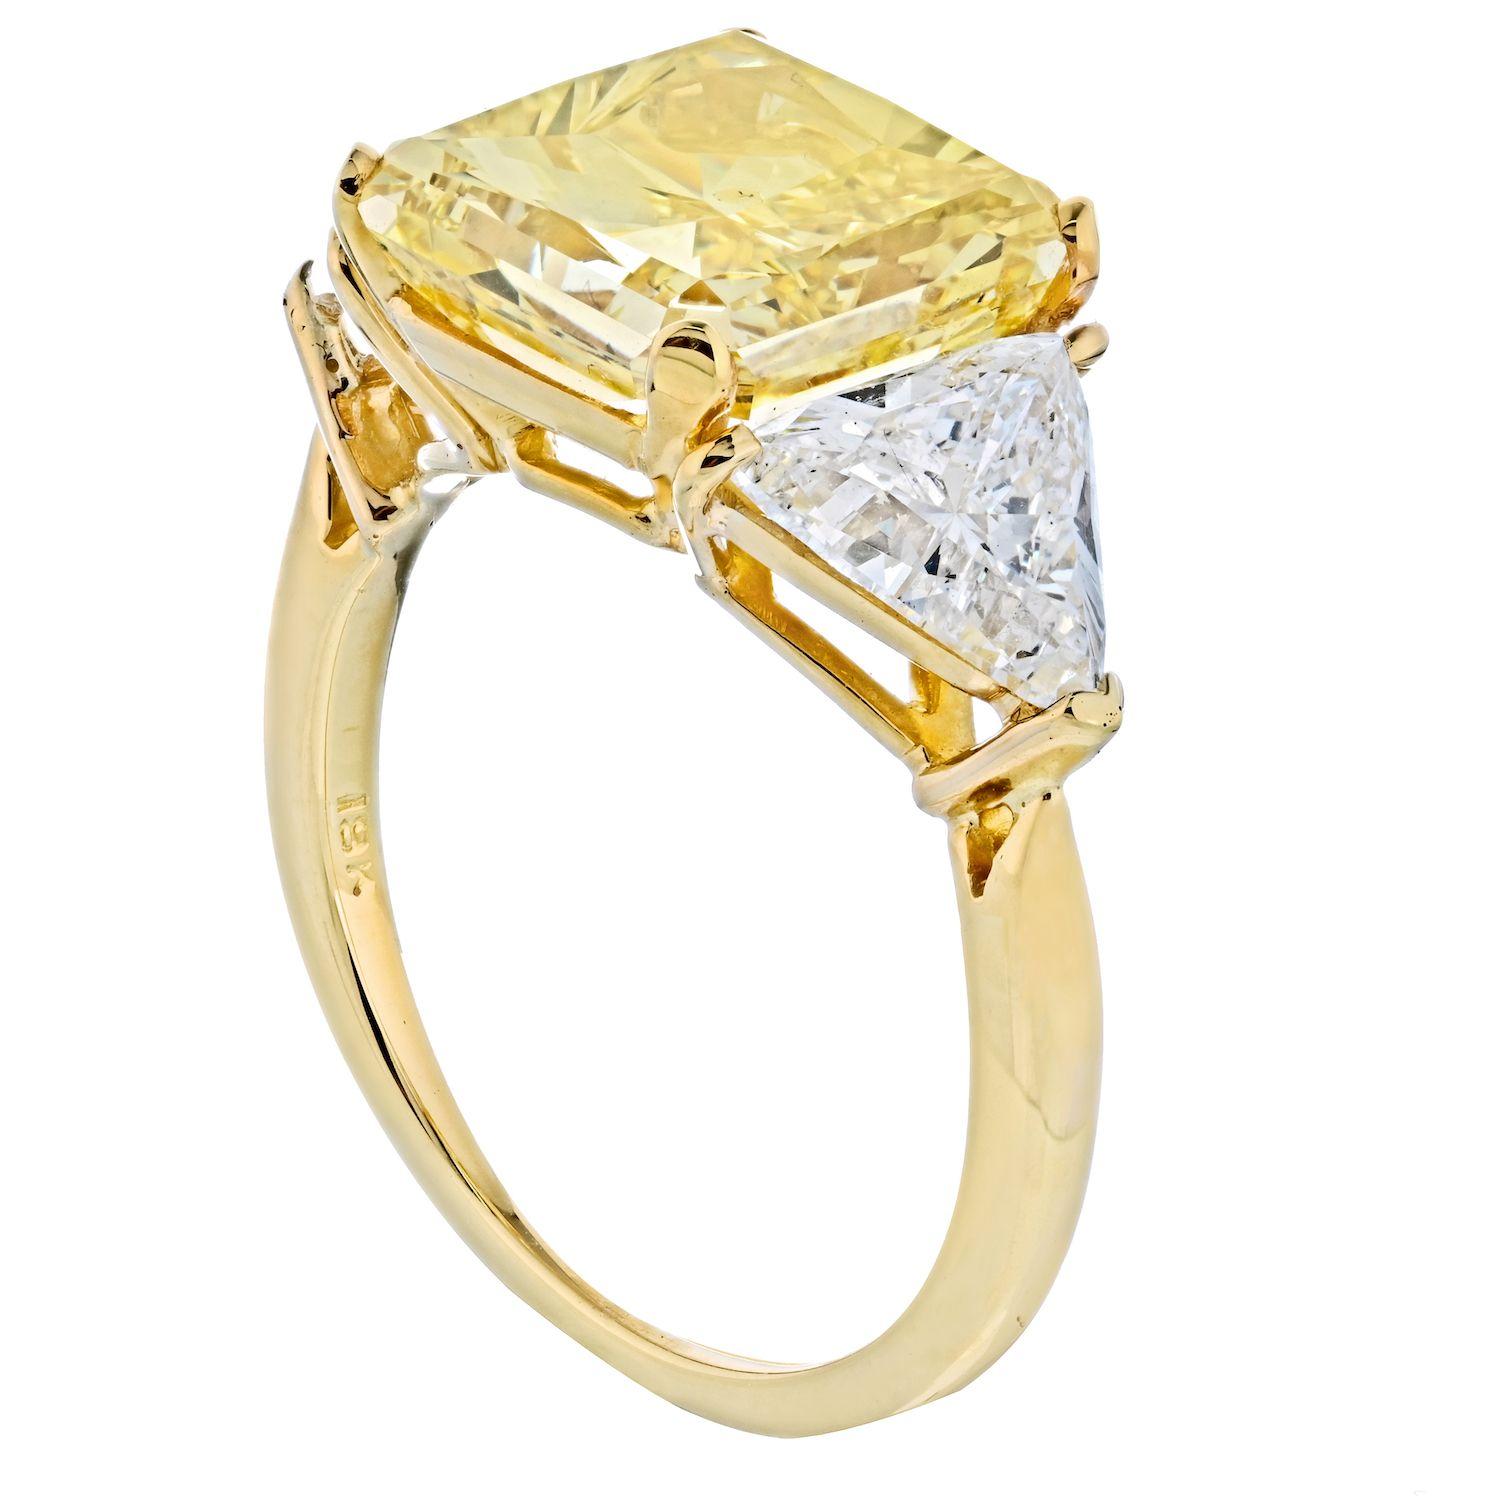 If you prefer your jewelry being made in yellow gold, then this is a ring for you! Three stone diamond engagement ring crafted in 18k yellow gold, mounted with 5.83 Carat fancy vivid yellow radiant cut diamond flanked by white brilliant cut